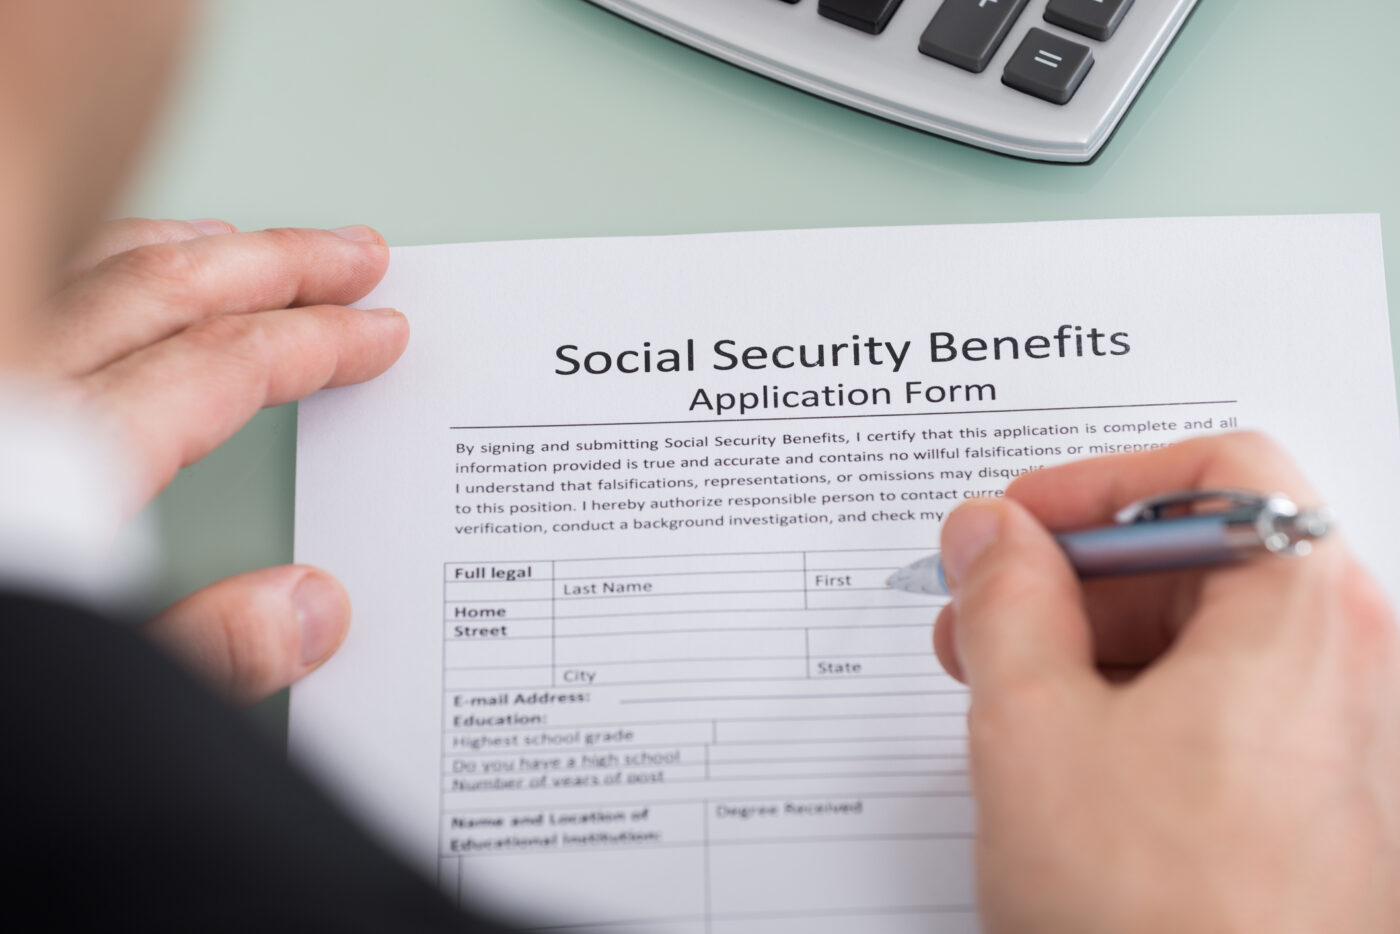 Choosing the Best Time to Claim Social Security Benefits